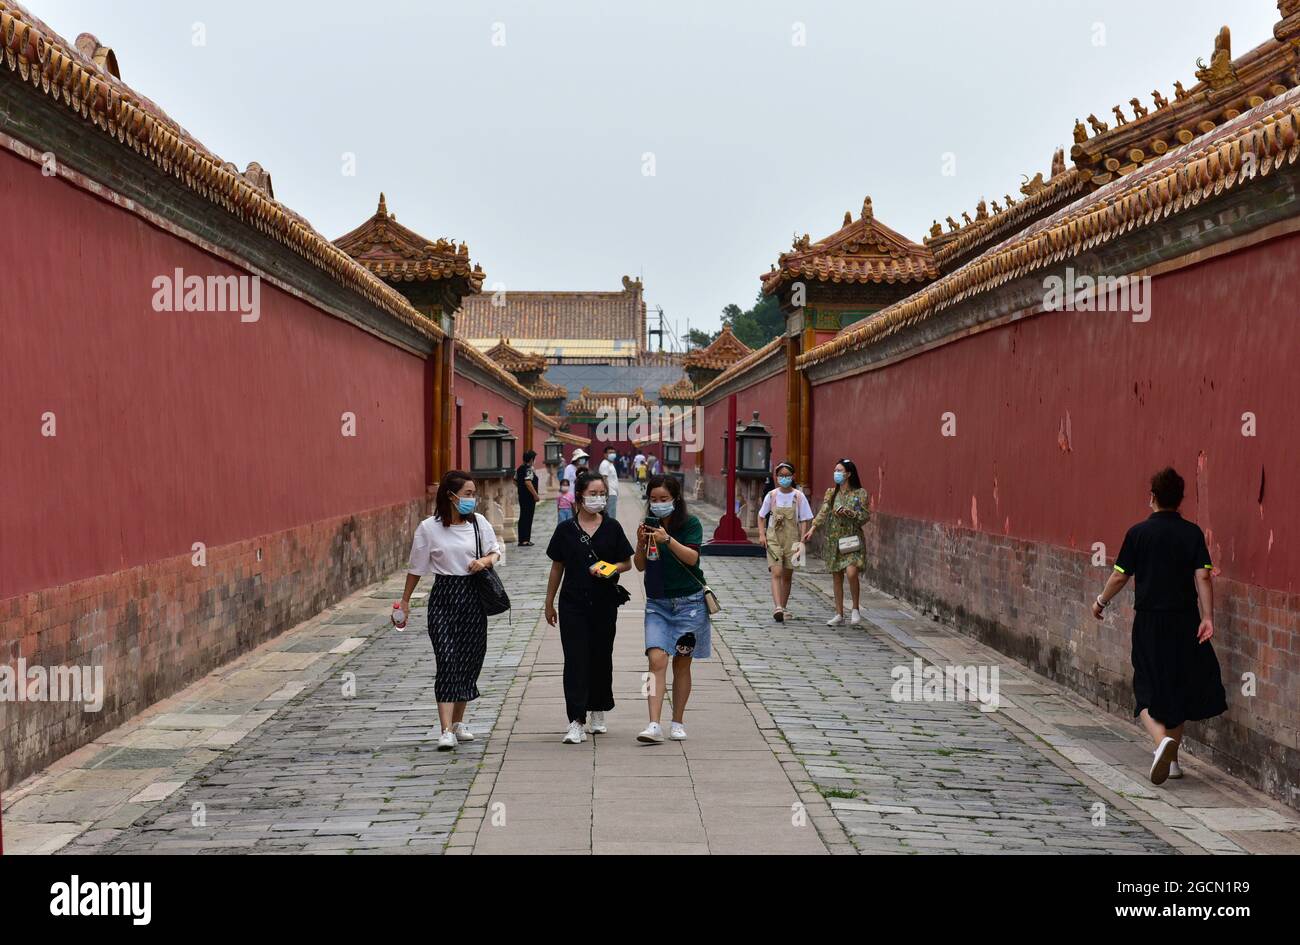 Beijing, China. 8th Aug, 2021. People wearing face masks as a preventive measure against the spread of covid-19 walk around the Forbidden City in Beijing.President Xi Jinping said on Thursday that China will provide a total of 2 billion doses of COVID-19 vaccines to the world this year, in the latest effort to honor its commitment to make vaccines a global public good by ensuring vaccine accessibility and affordability. (Credit Image: © Sheldon Cooper/SOPA Images via ZUMA Press Wire) Stock Photo